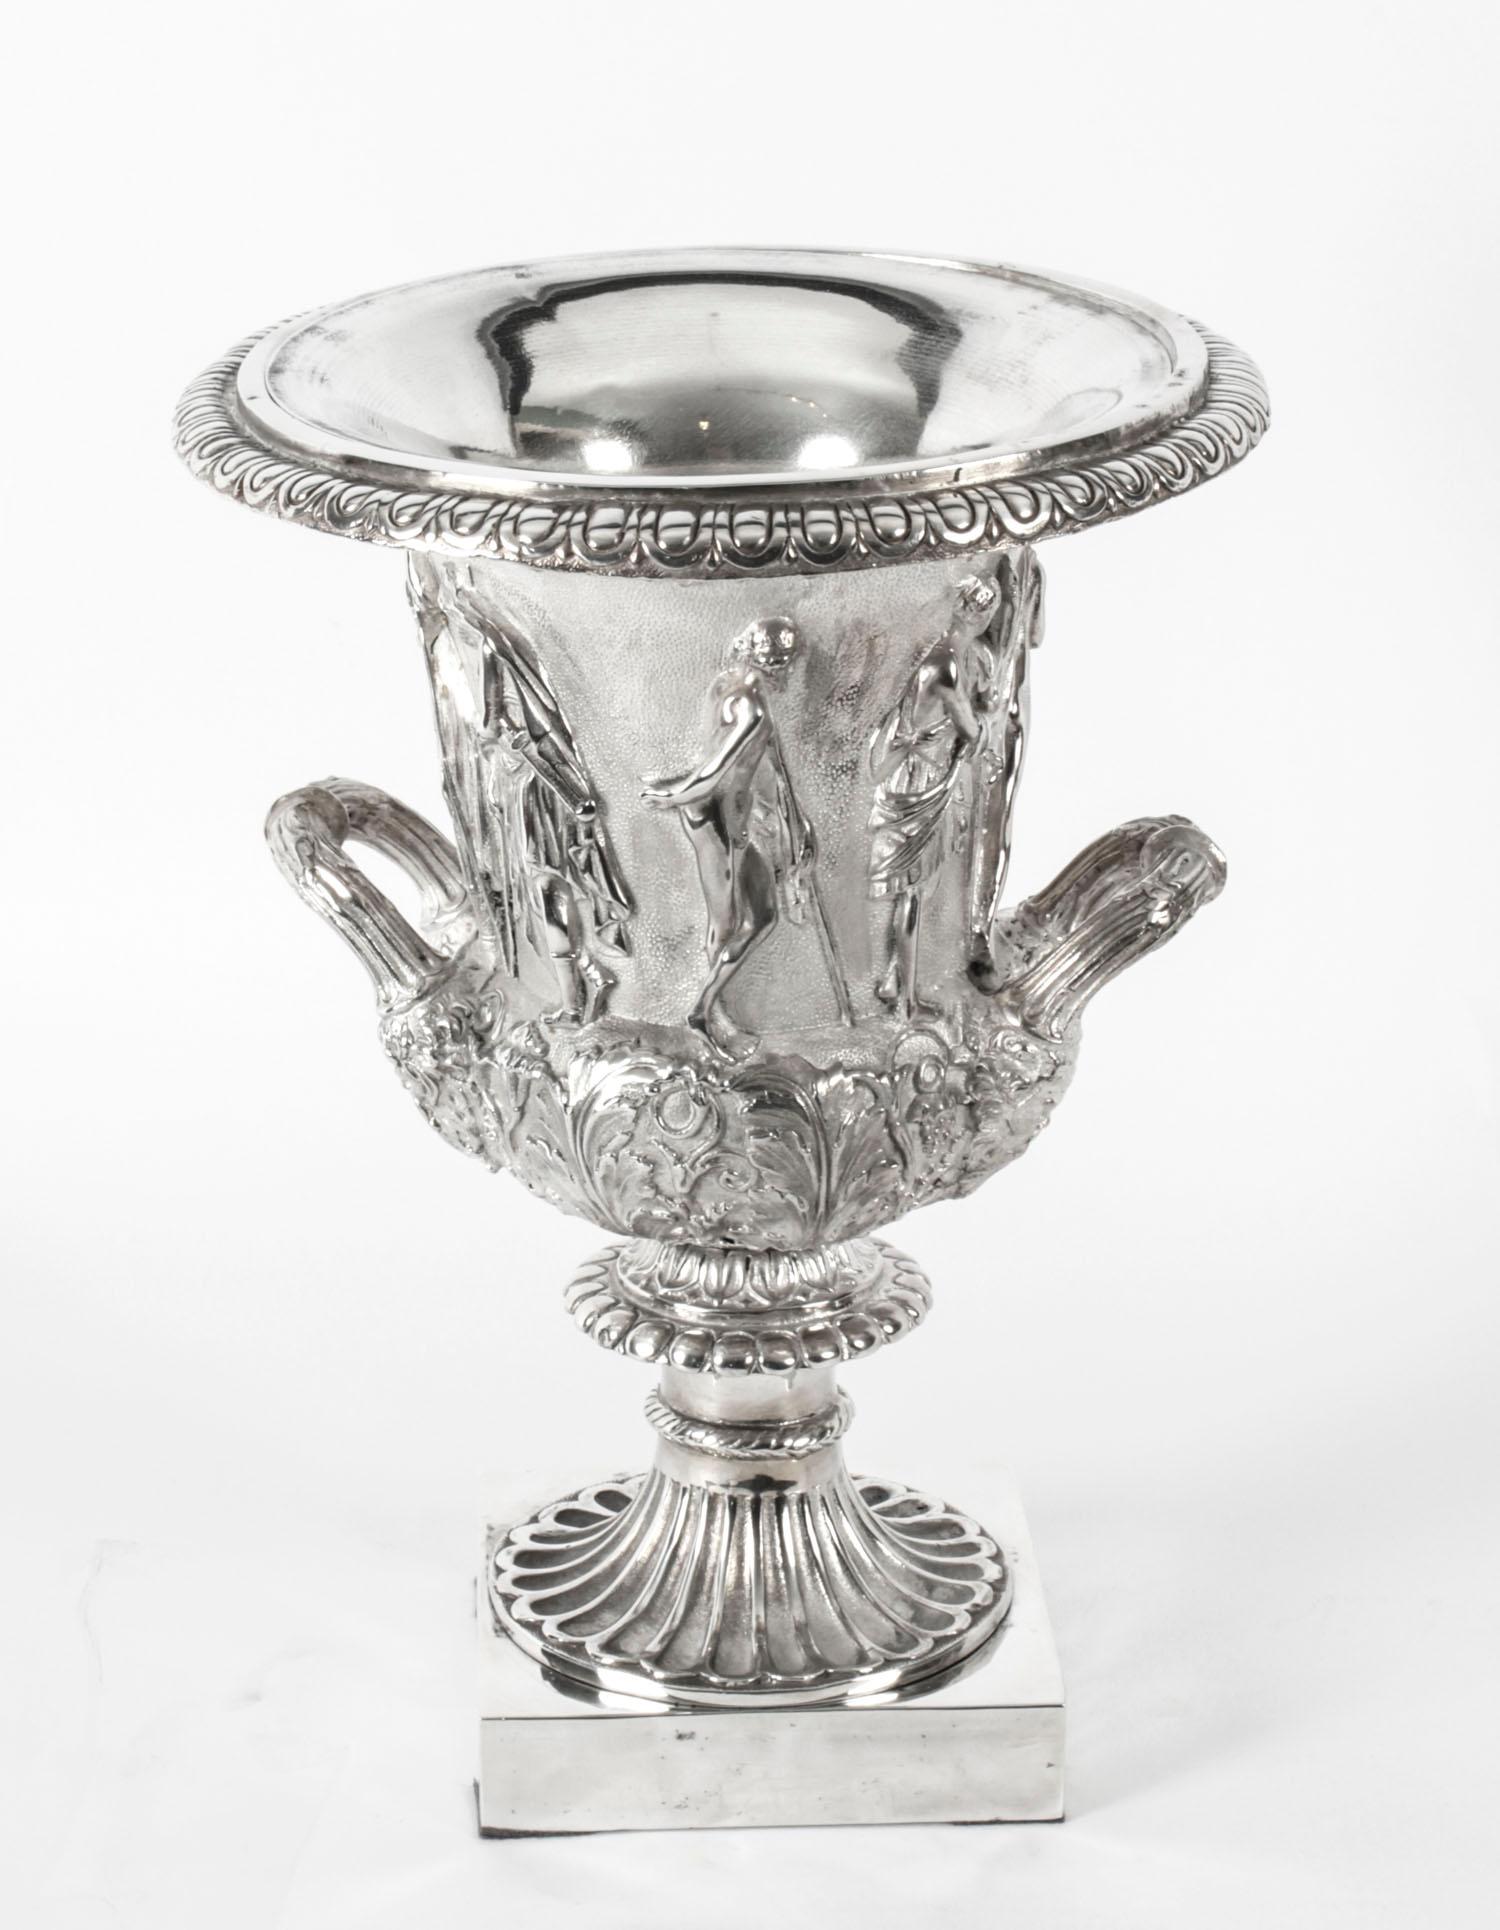 A superb antique pair of Grand Tour silver plated bronze Borghese Campana urns, circa 1880 in date.

This pair of bronze campana urns are after the Borghese models with classical relief decoration with beaded rims and mythological figures on a